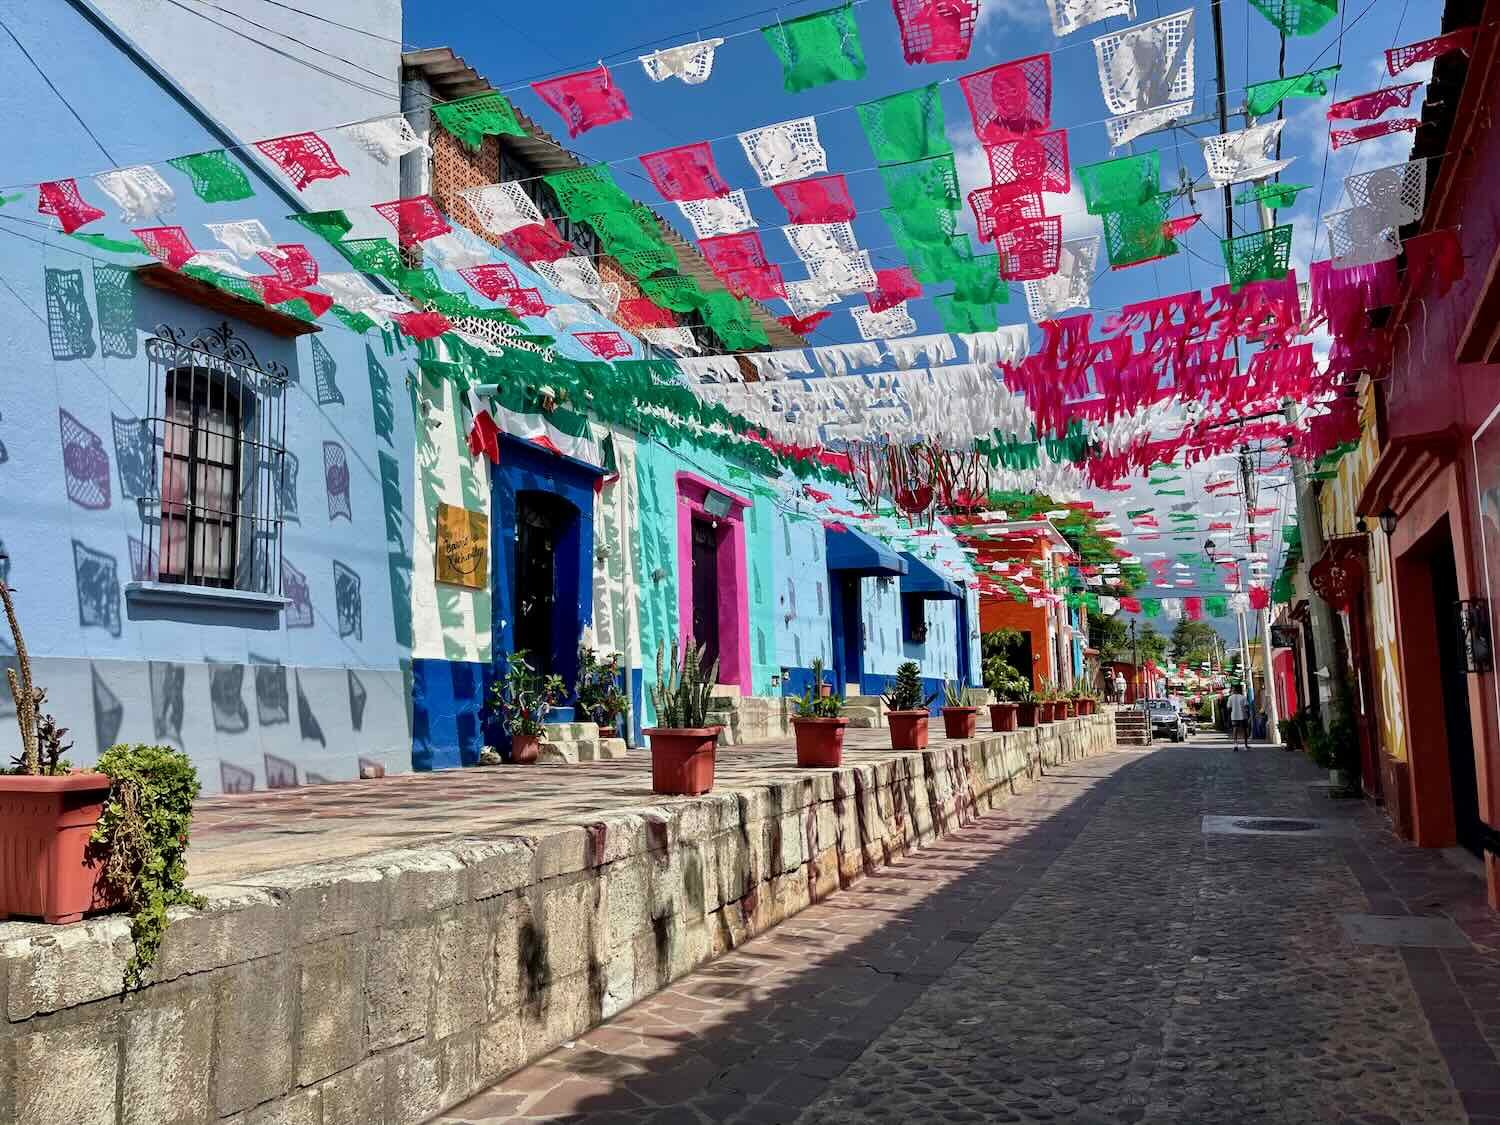 Many streets throughout town were decorated in the national colors